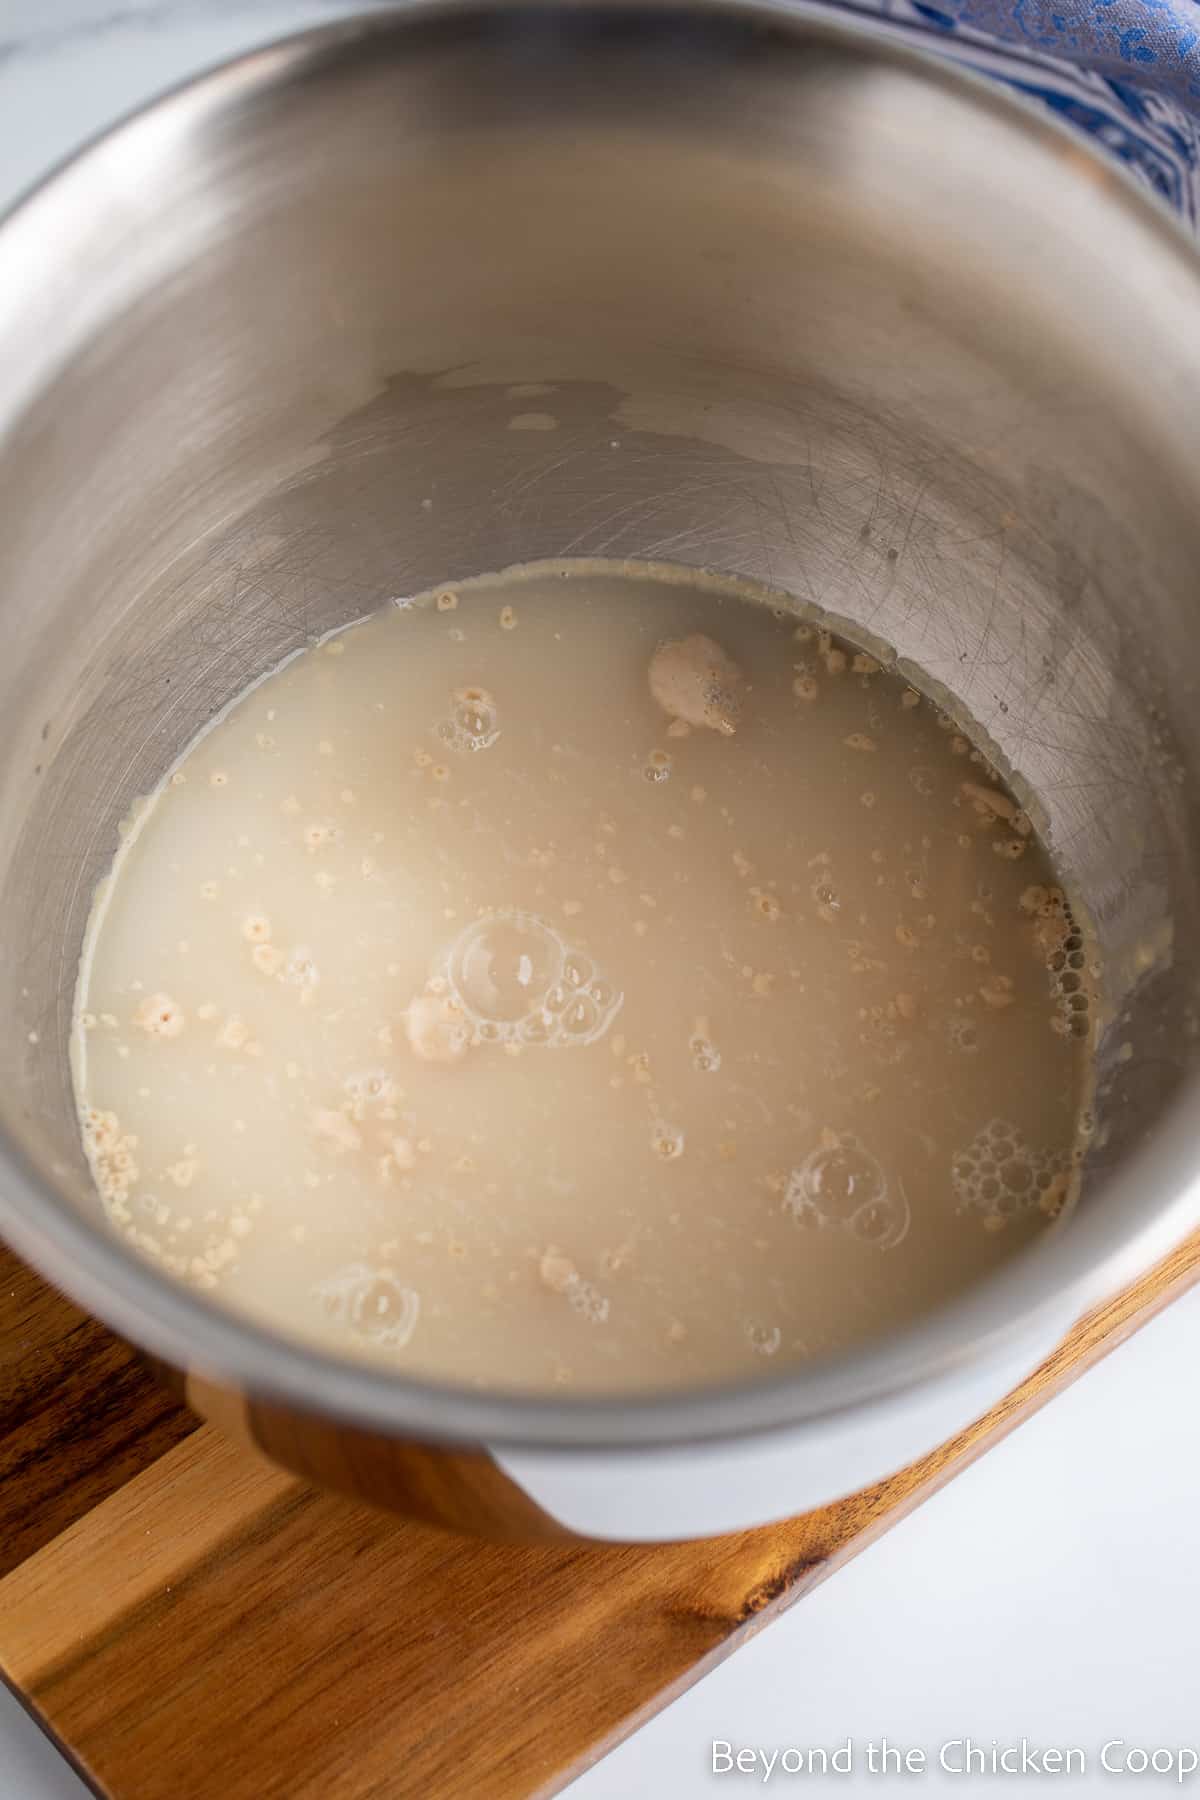 Yeast proofing in a bowl.